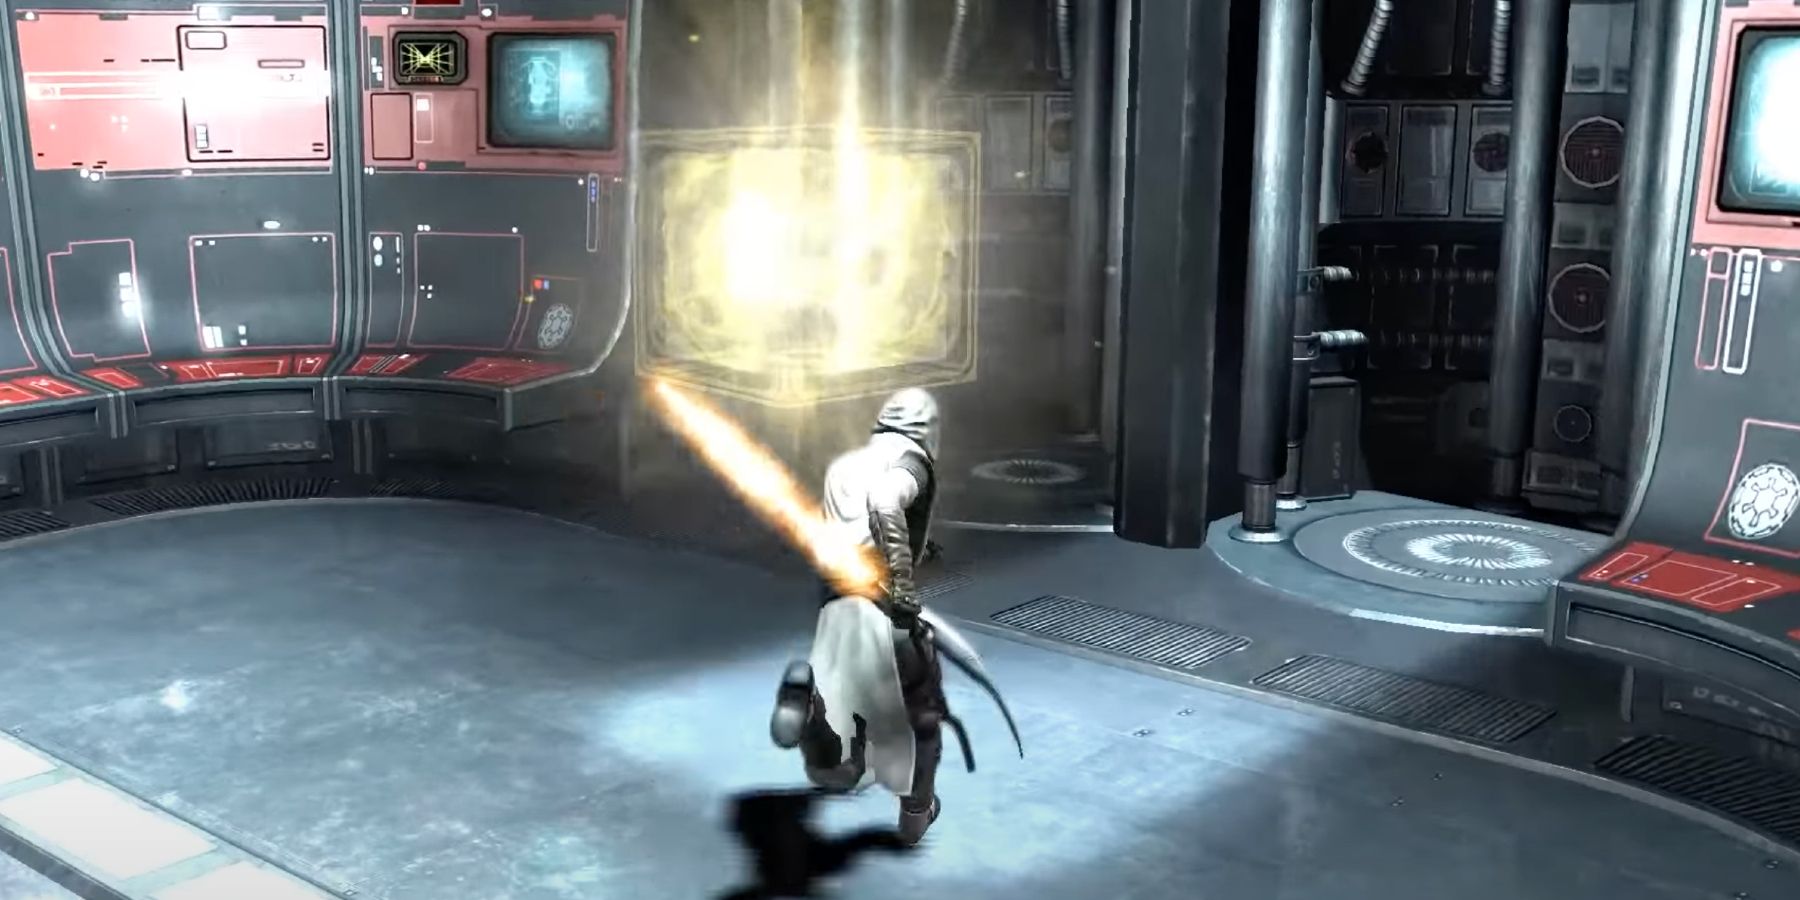 Star Wars Force Unleashed Every Holocron Location in The Death Star Hangar Walkway